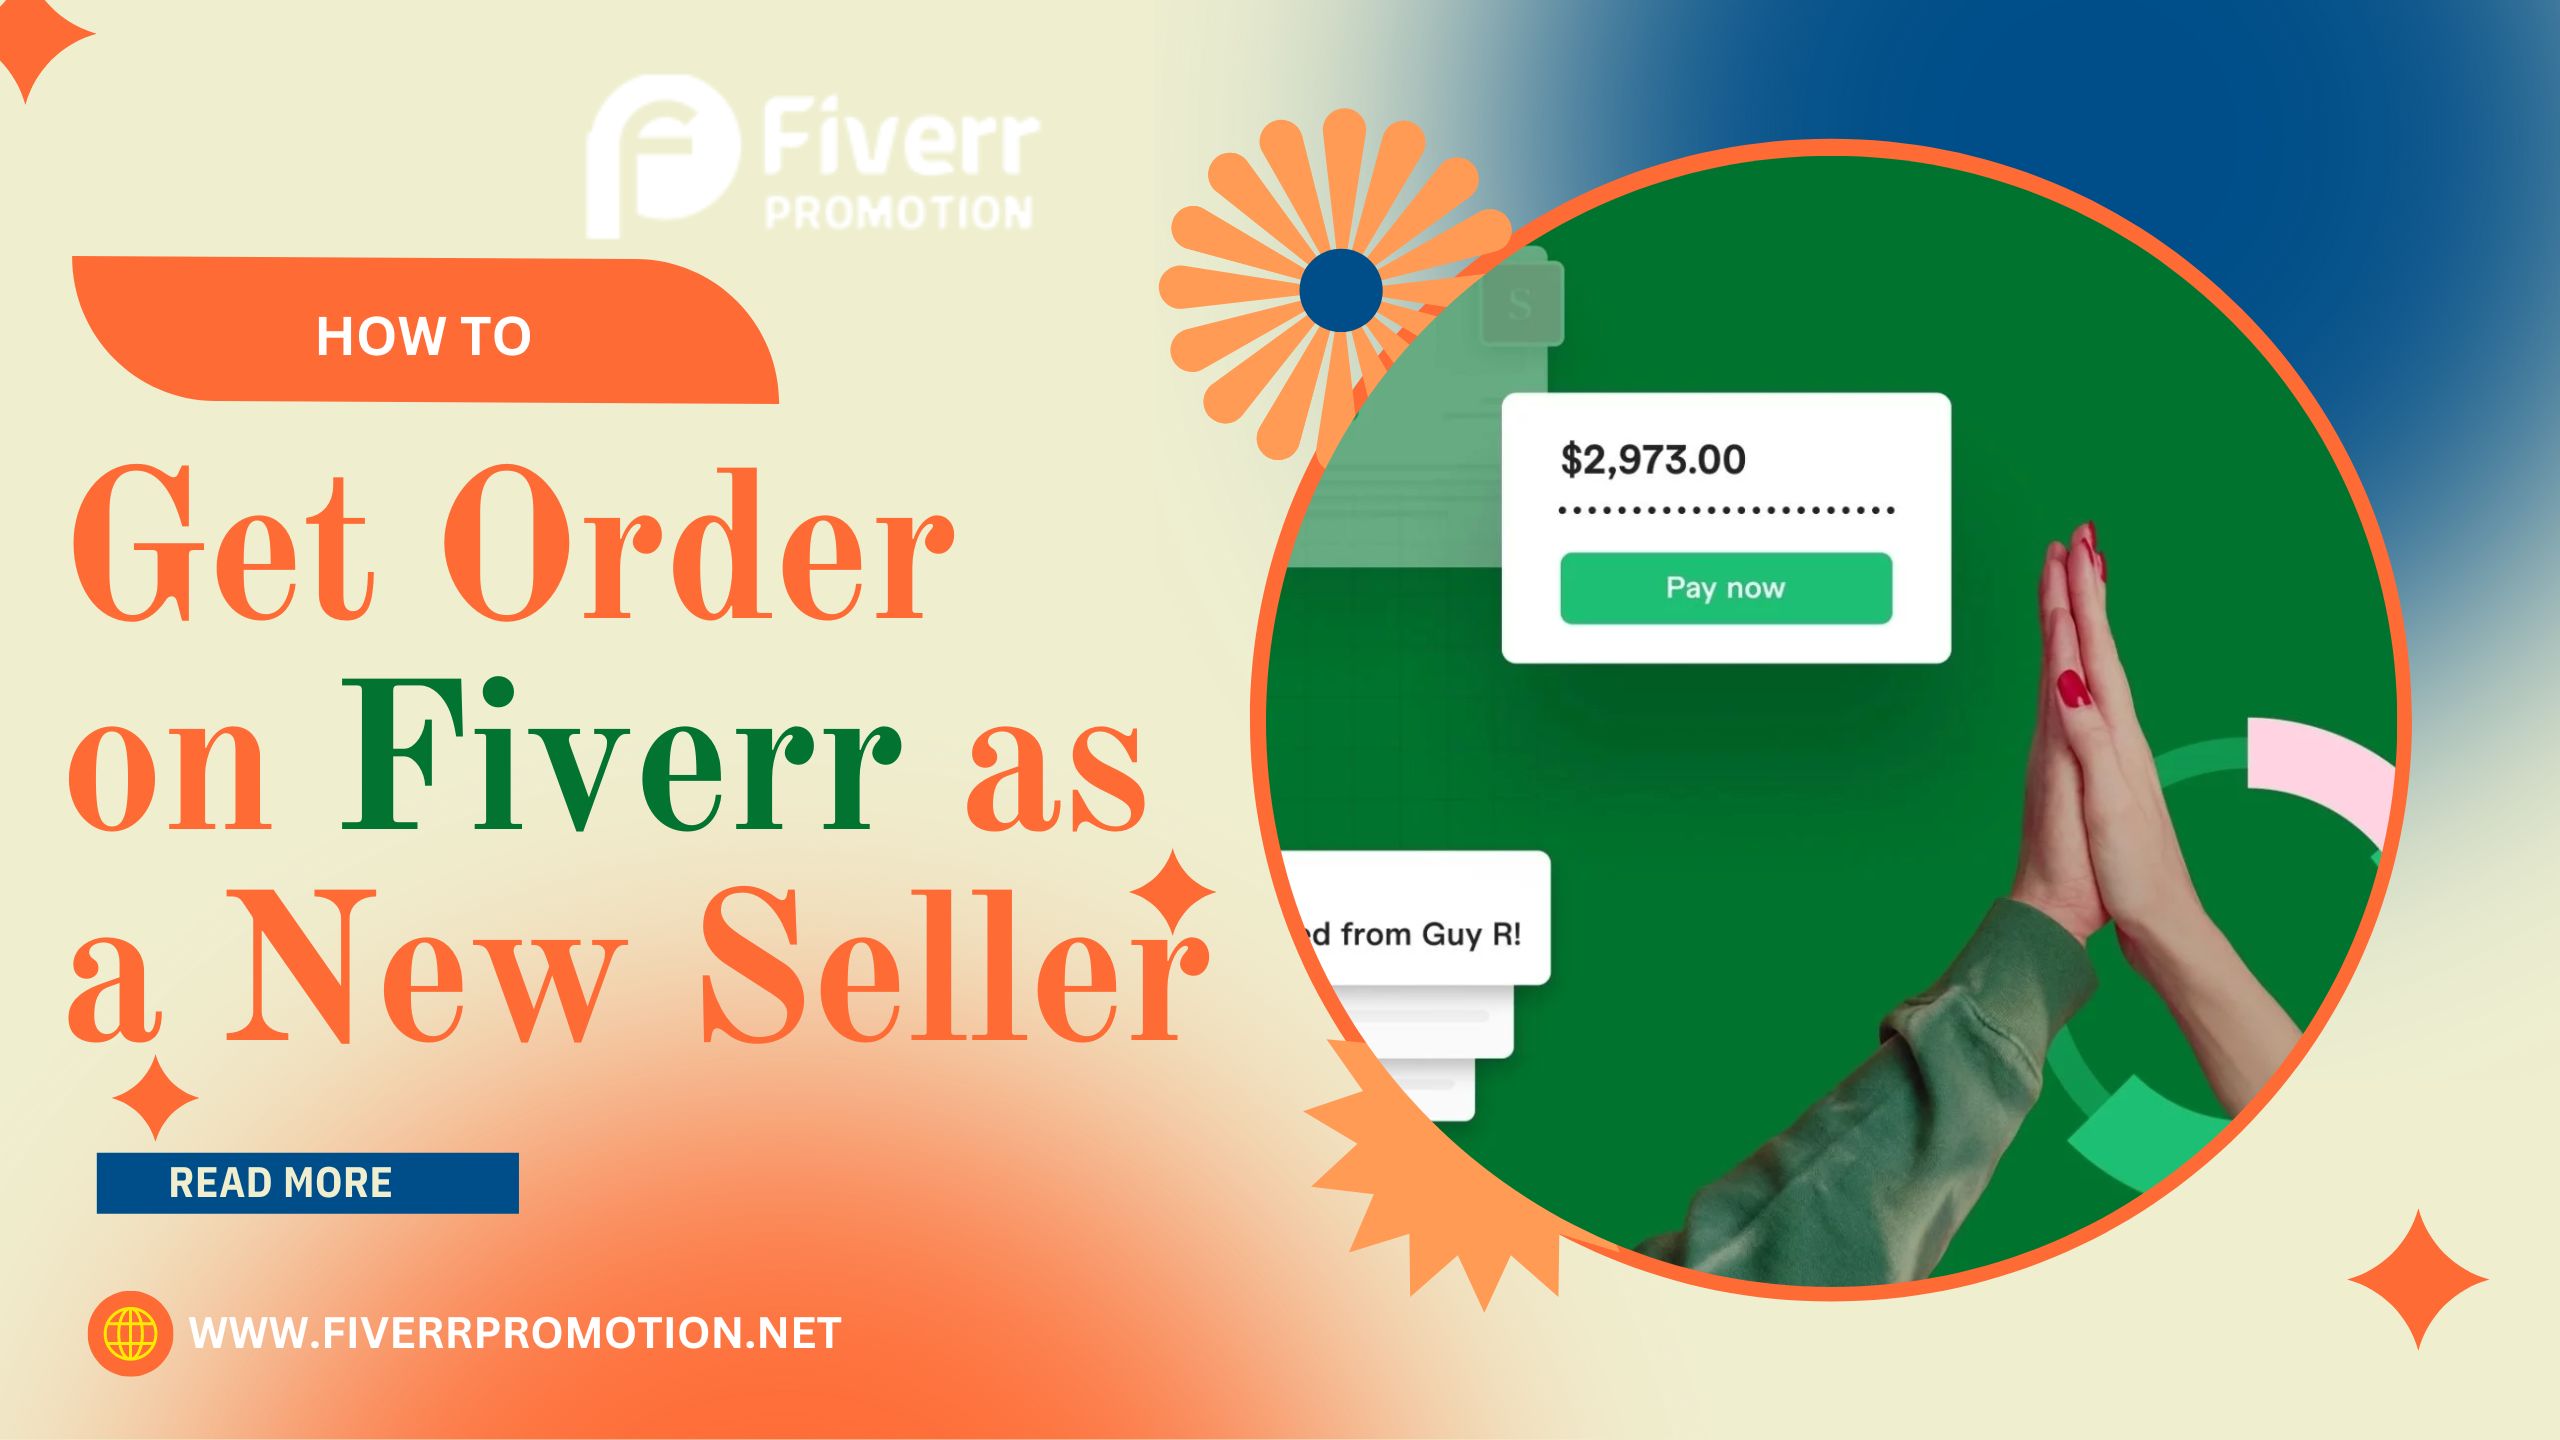 How to Get Order on Fiverr as a New Seller